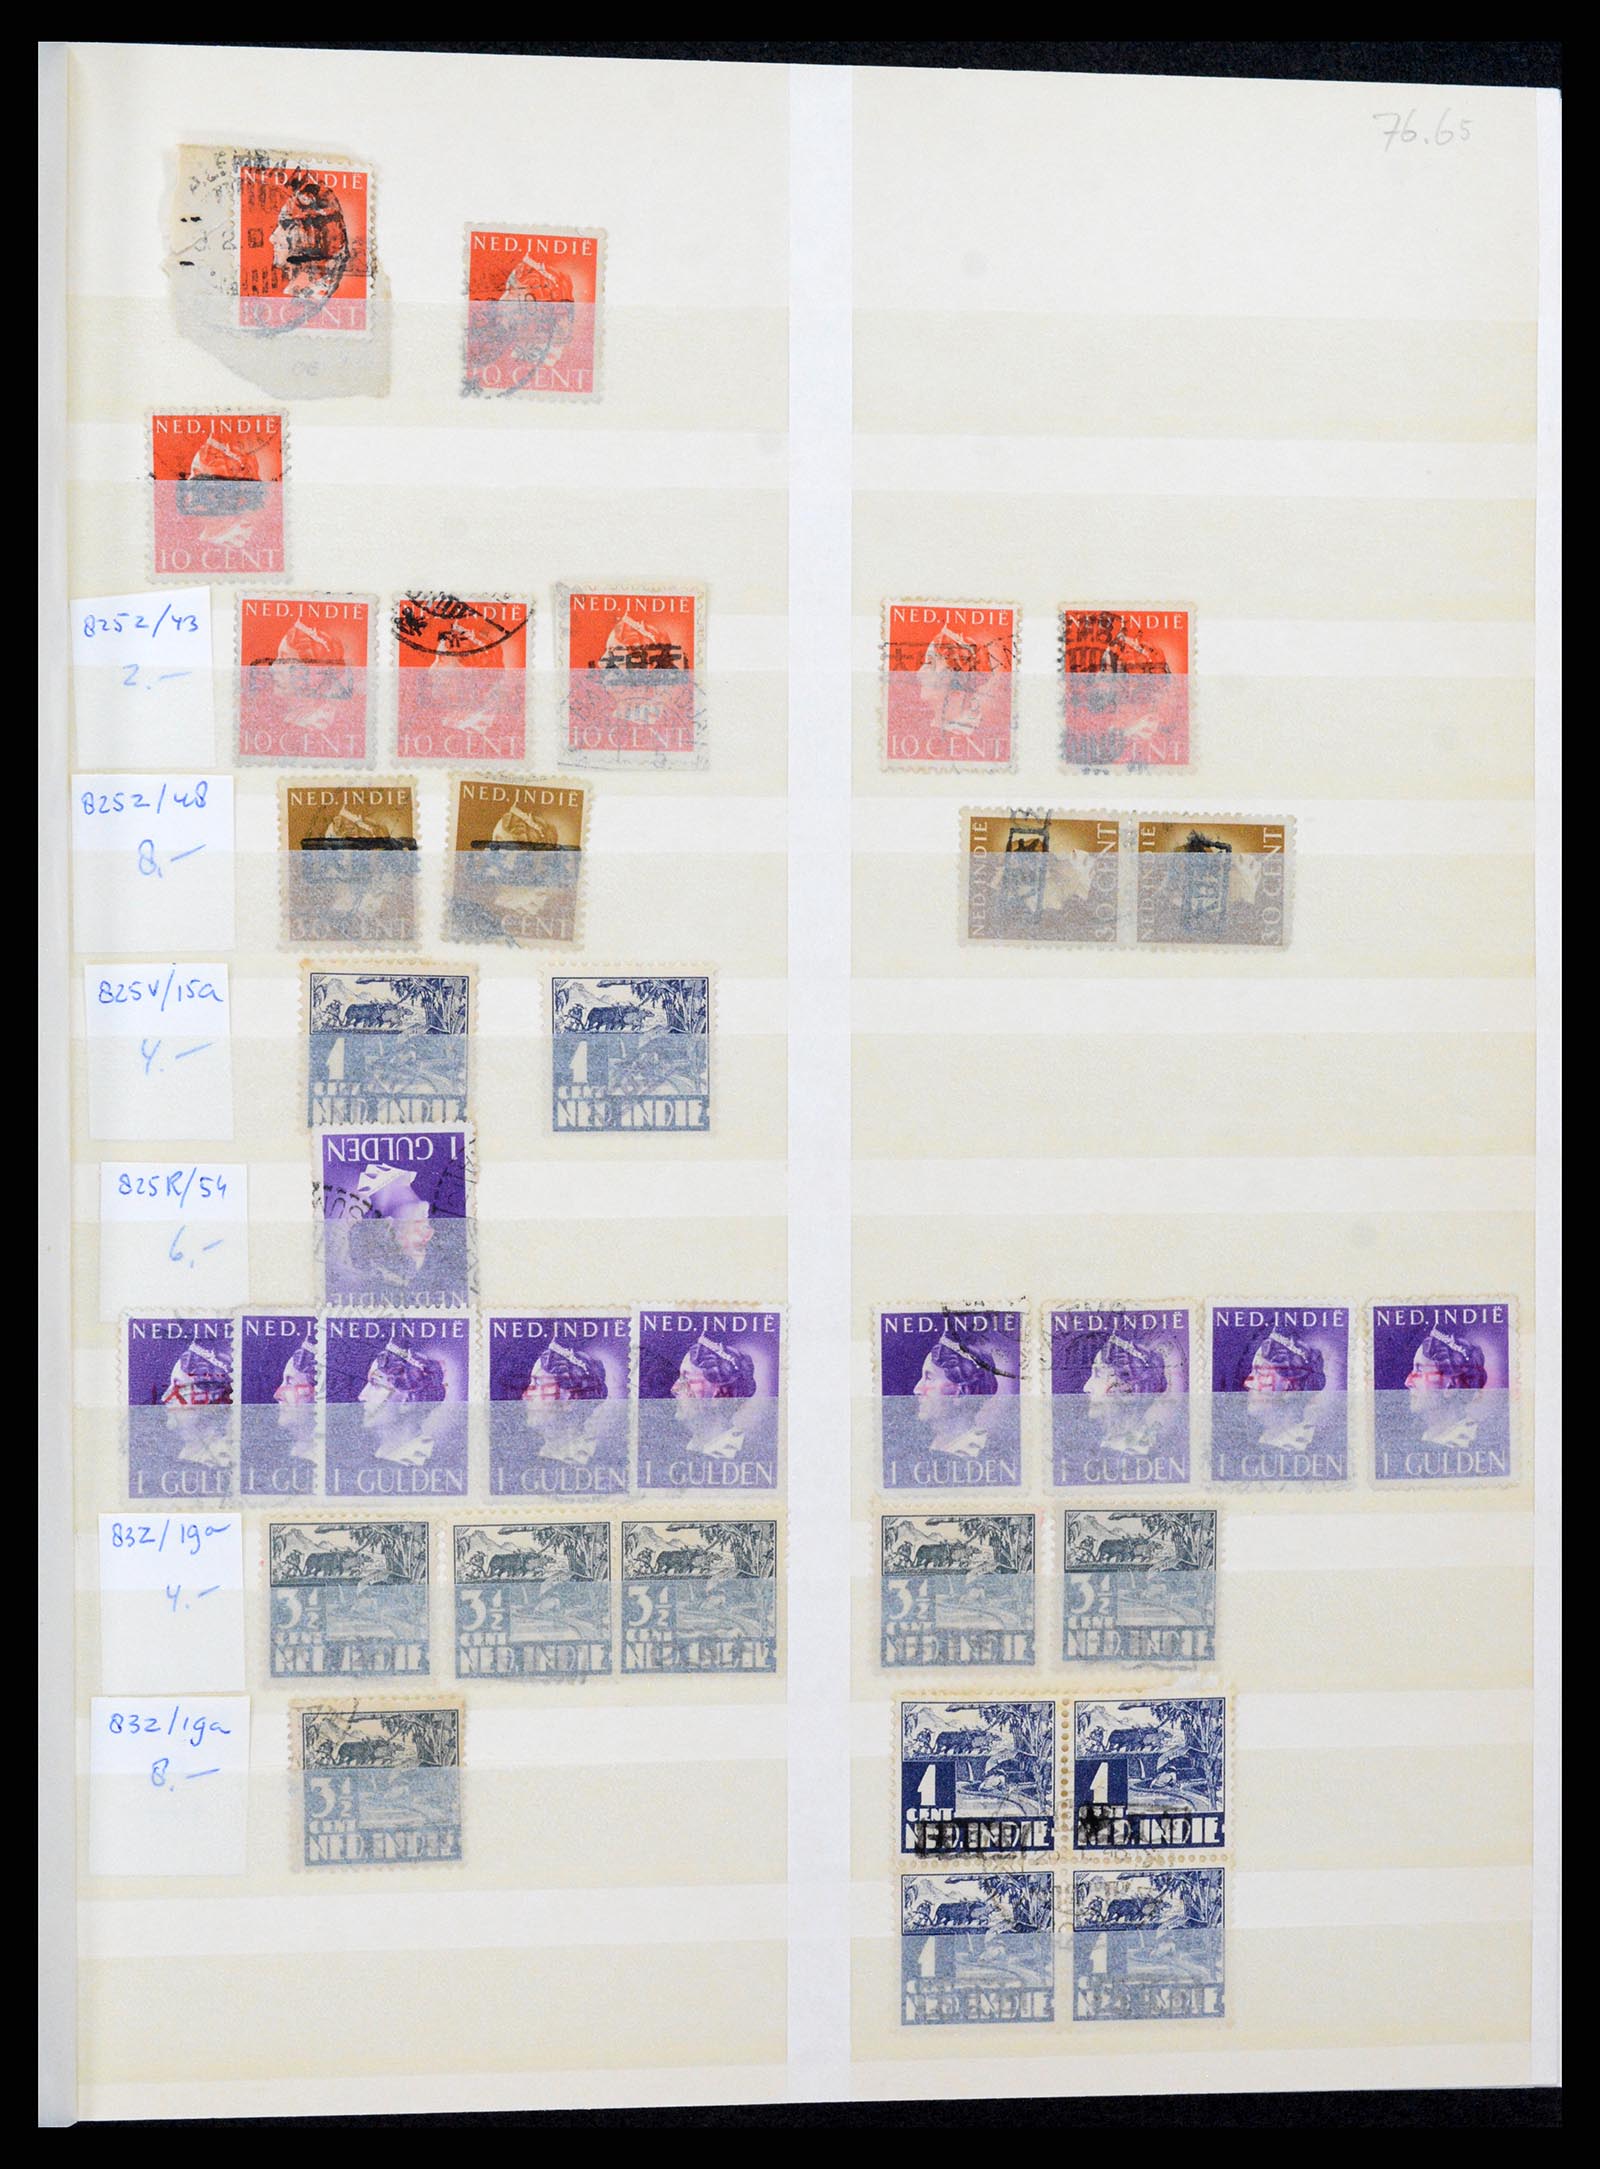 37429 011 - Stamp collection 37429 Japanese occupation Dutch East Indies 1942-1945.